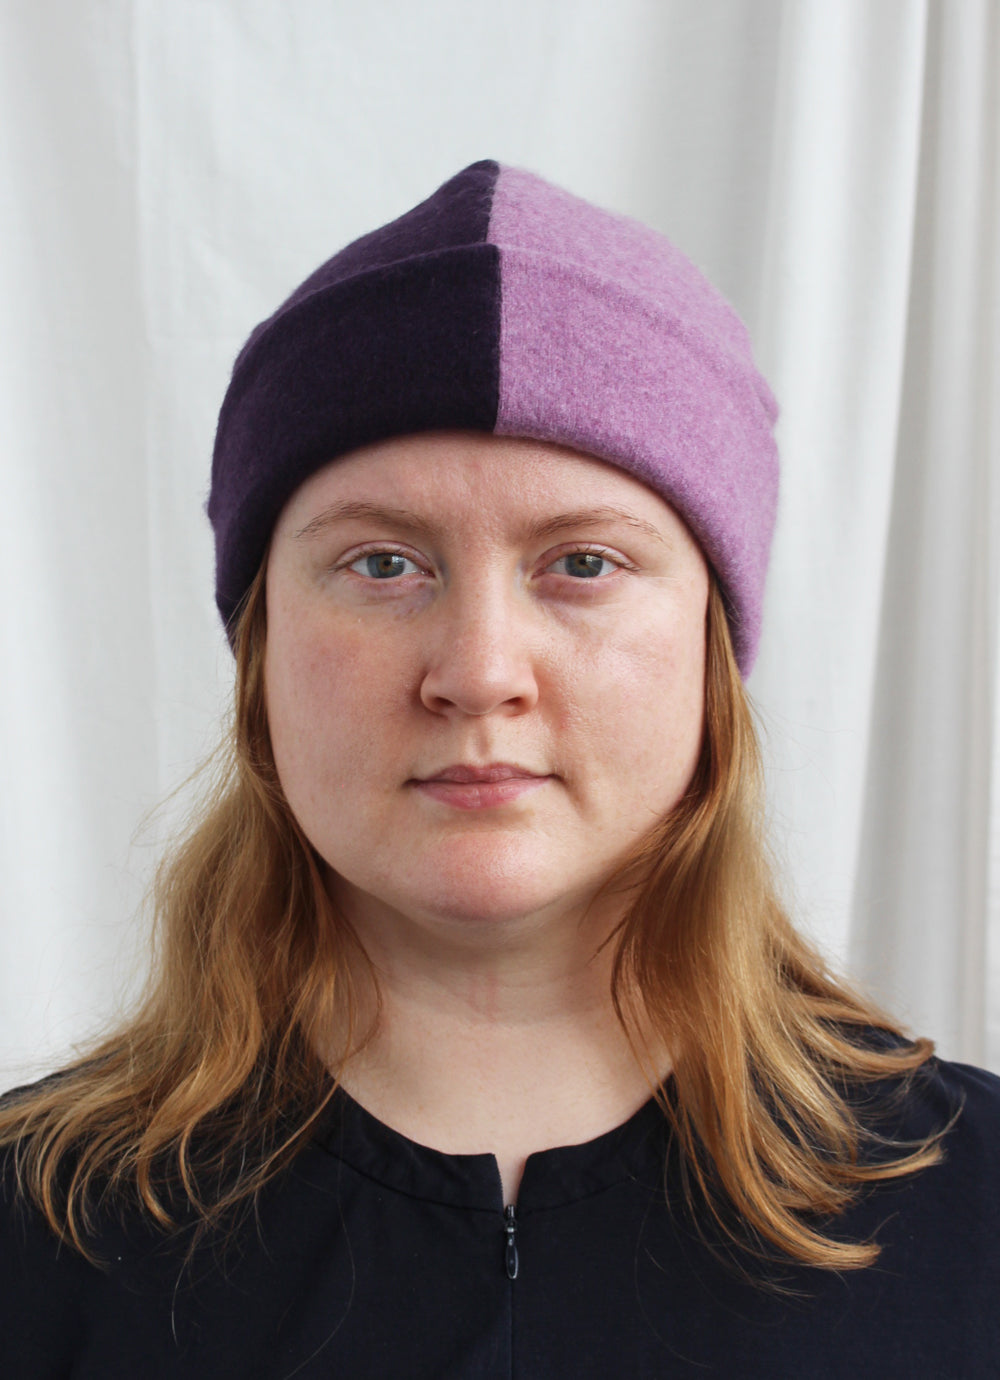 Reclaimed cashmere beanie hat